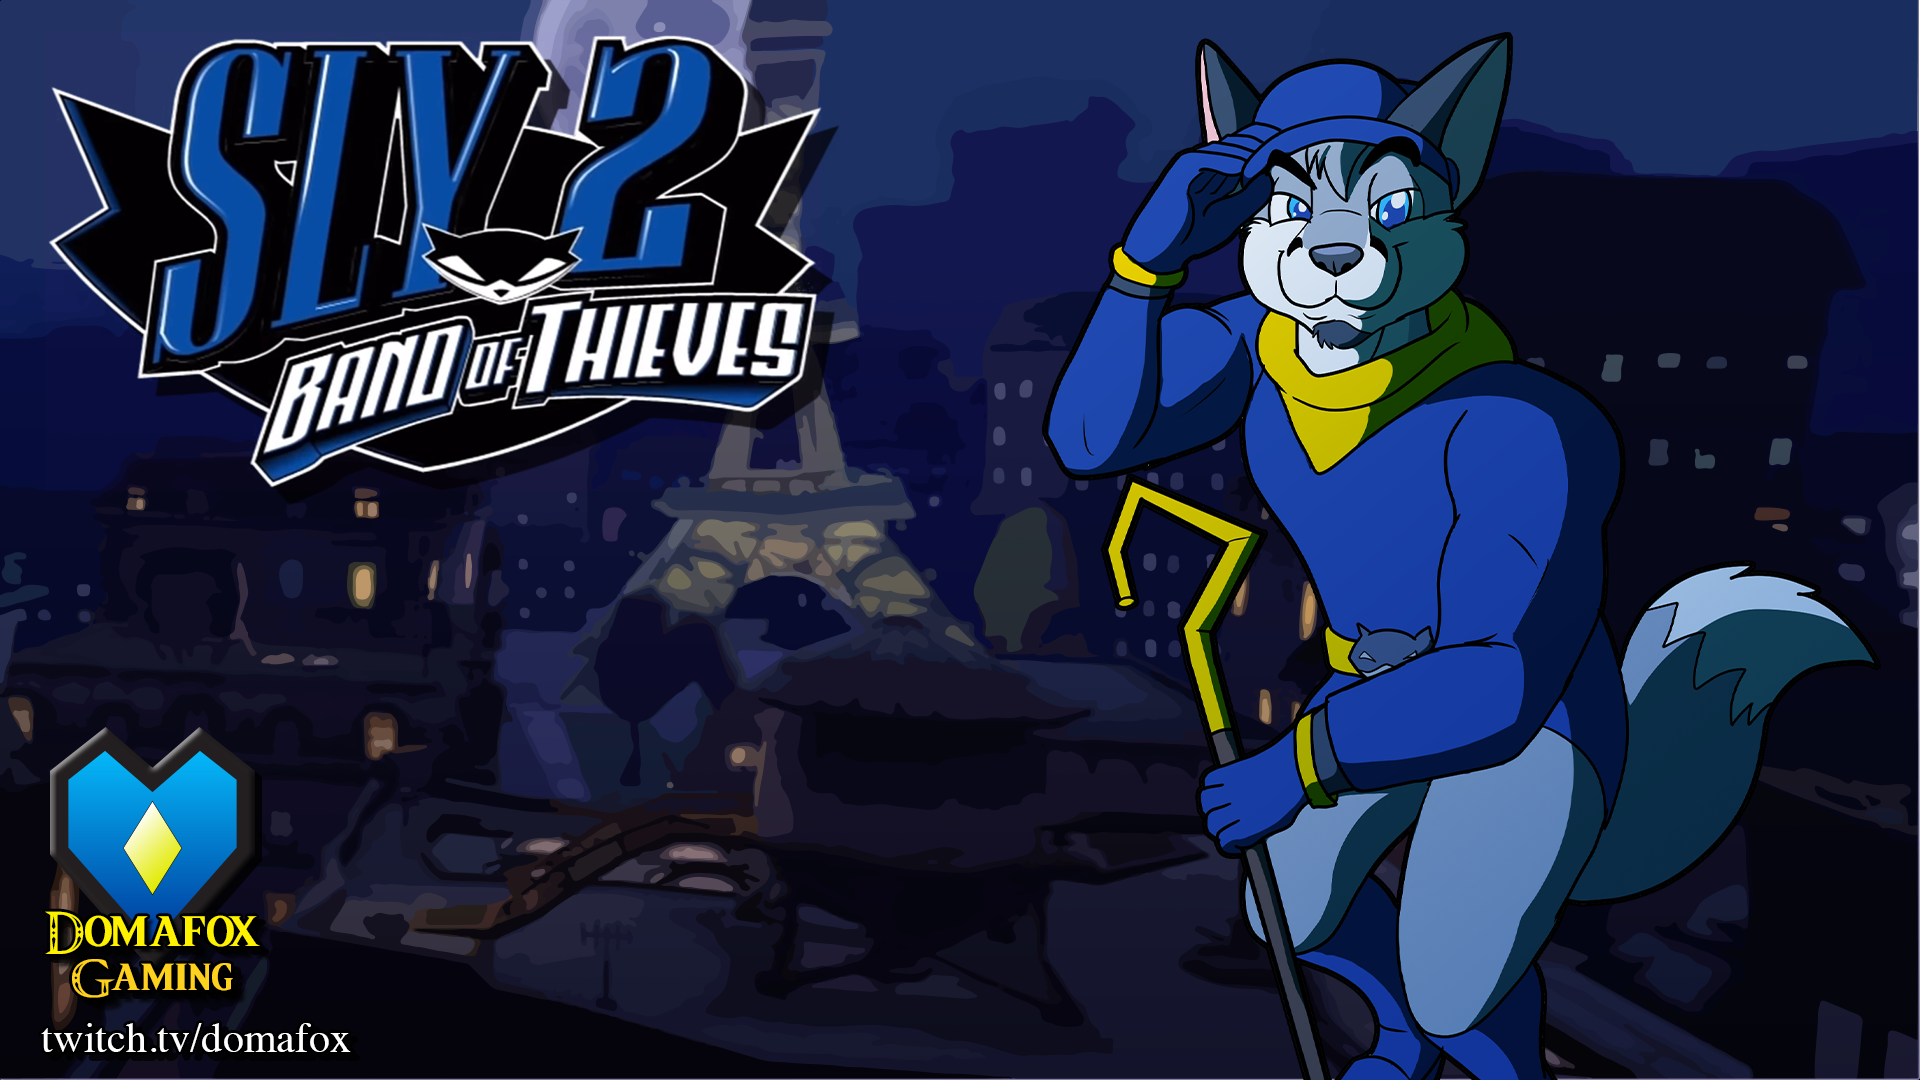 Sly Cooper 2 on Behance